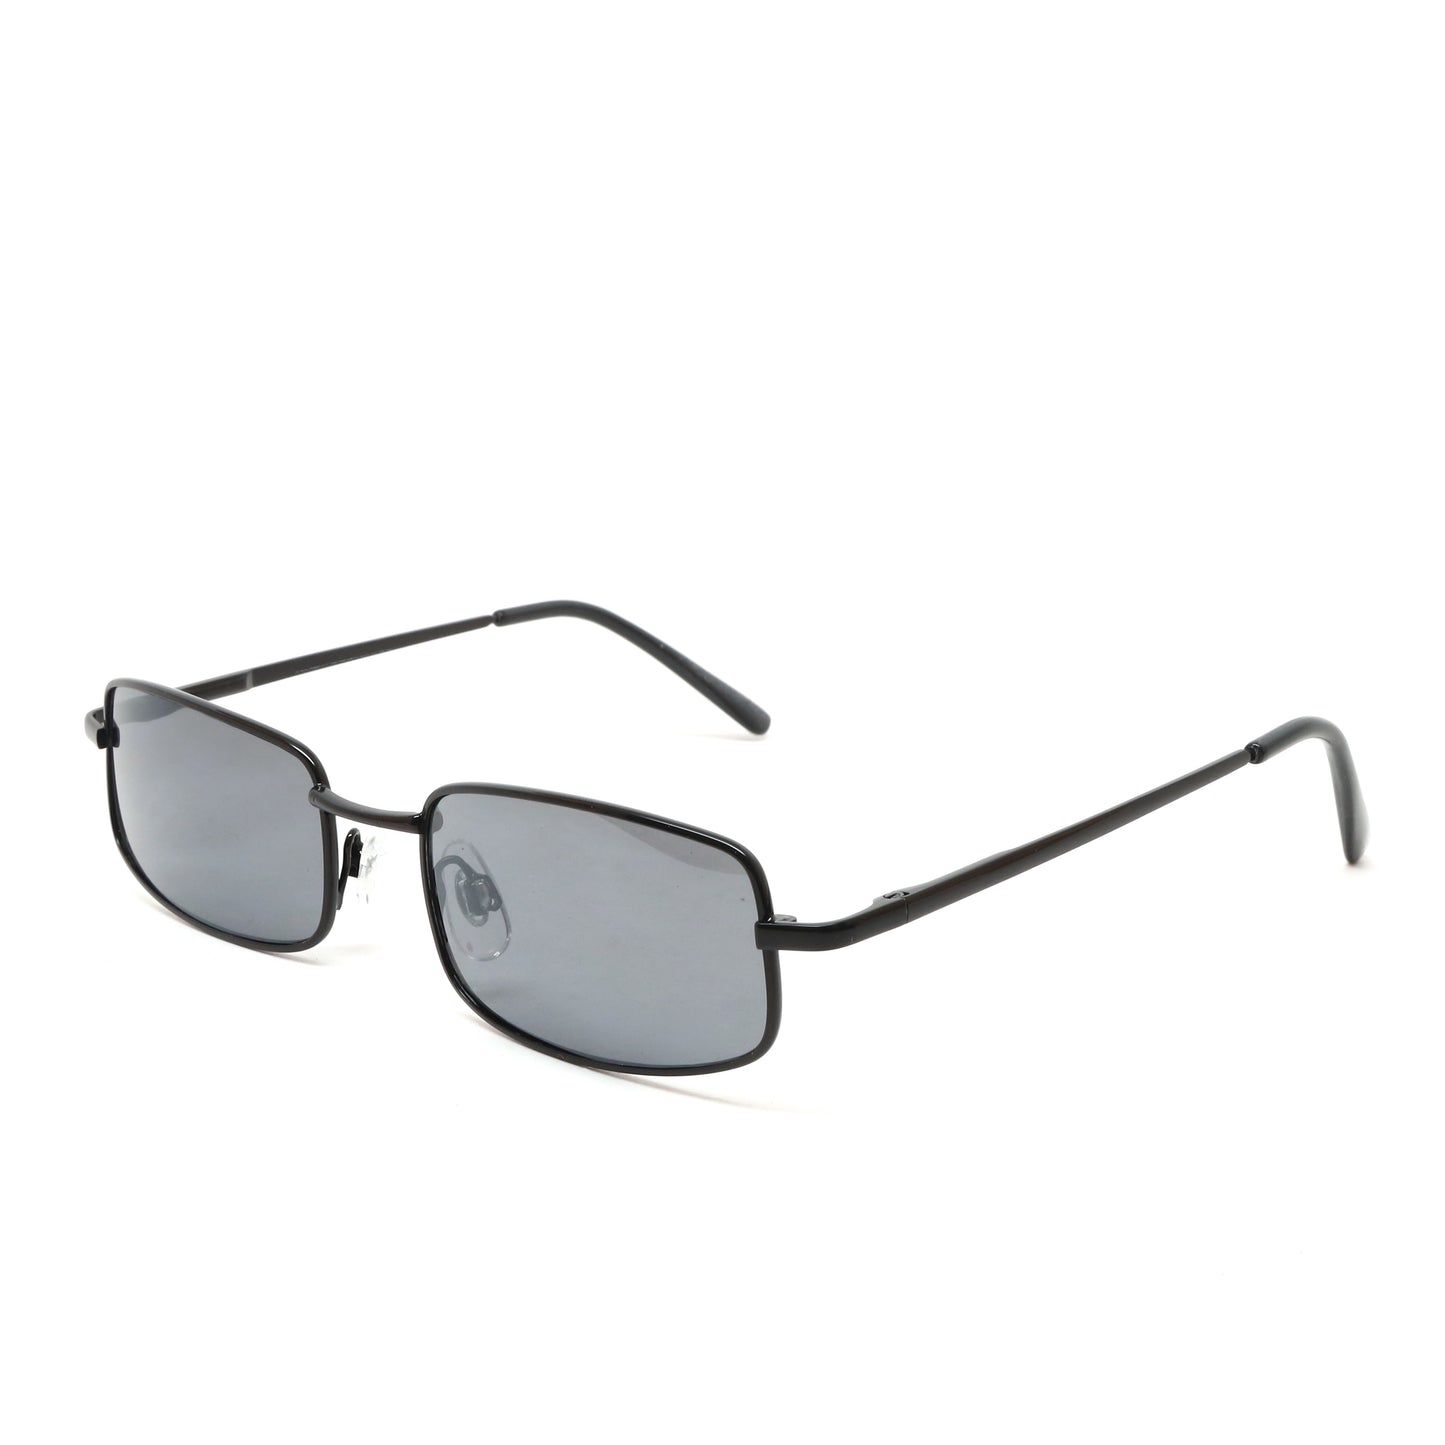 Deadstock Vintage Industrial Wire Rectangle Sunglasses - Grey